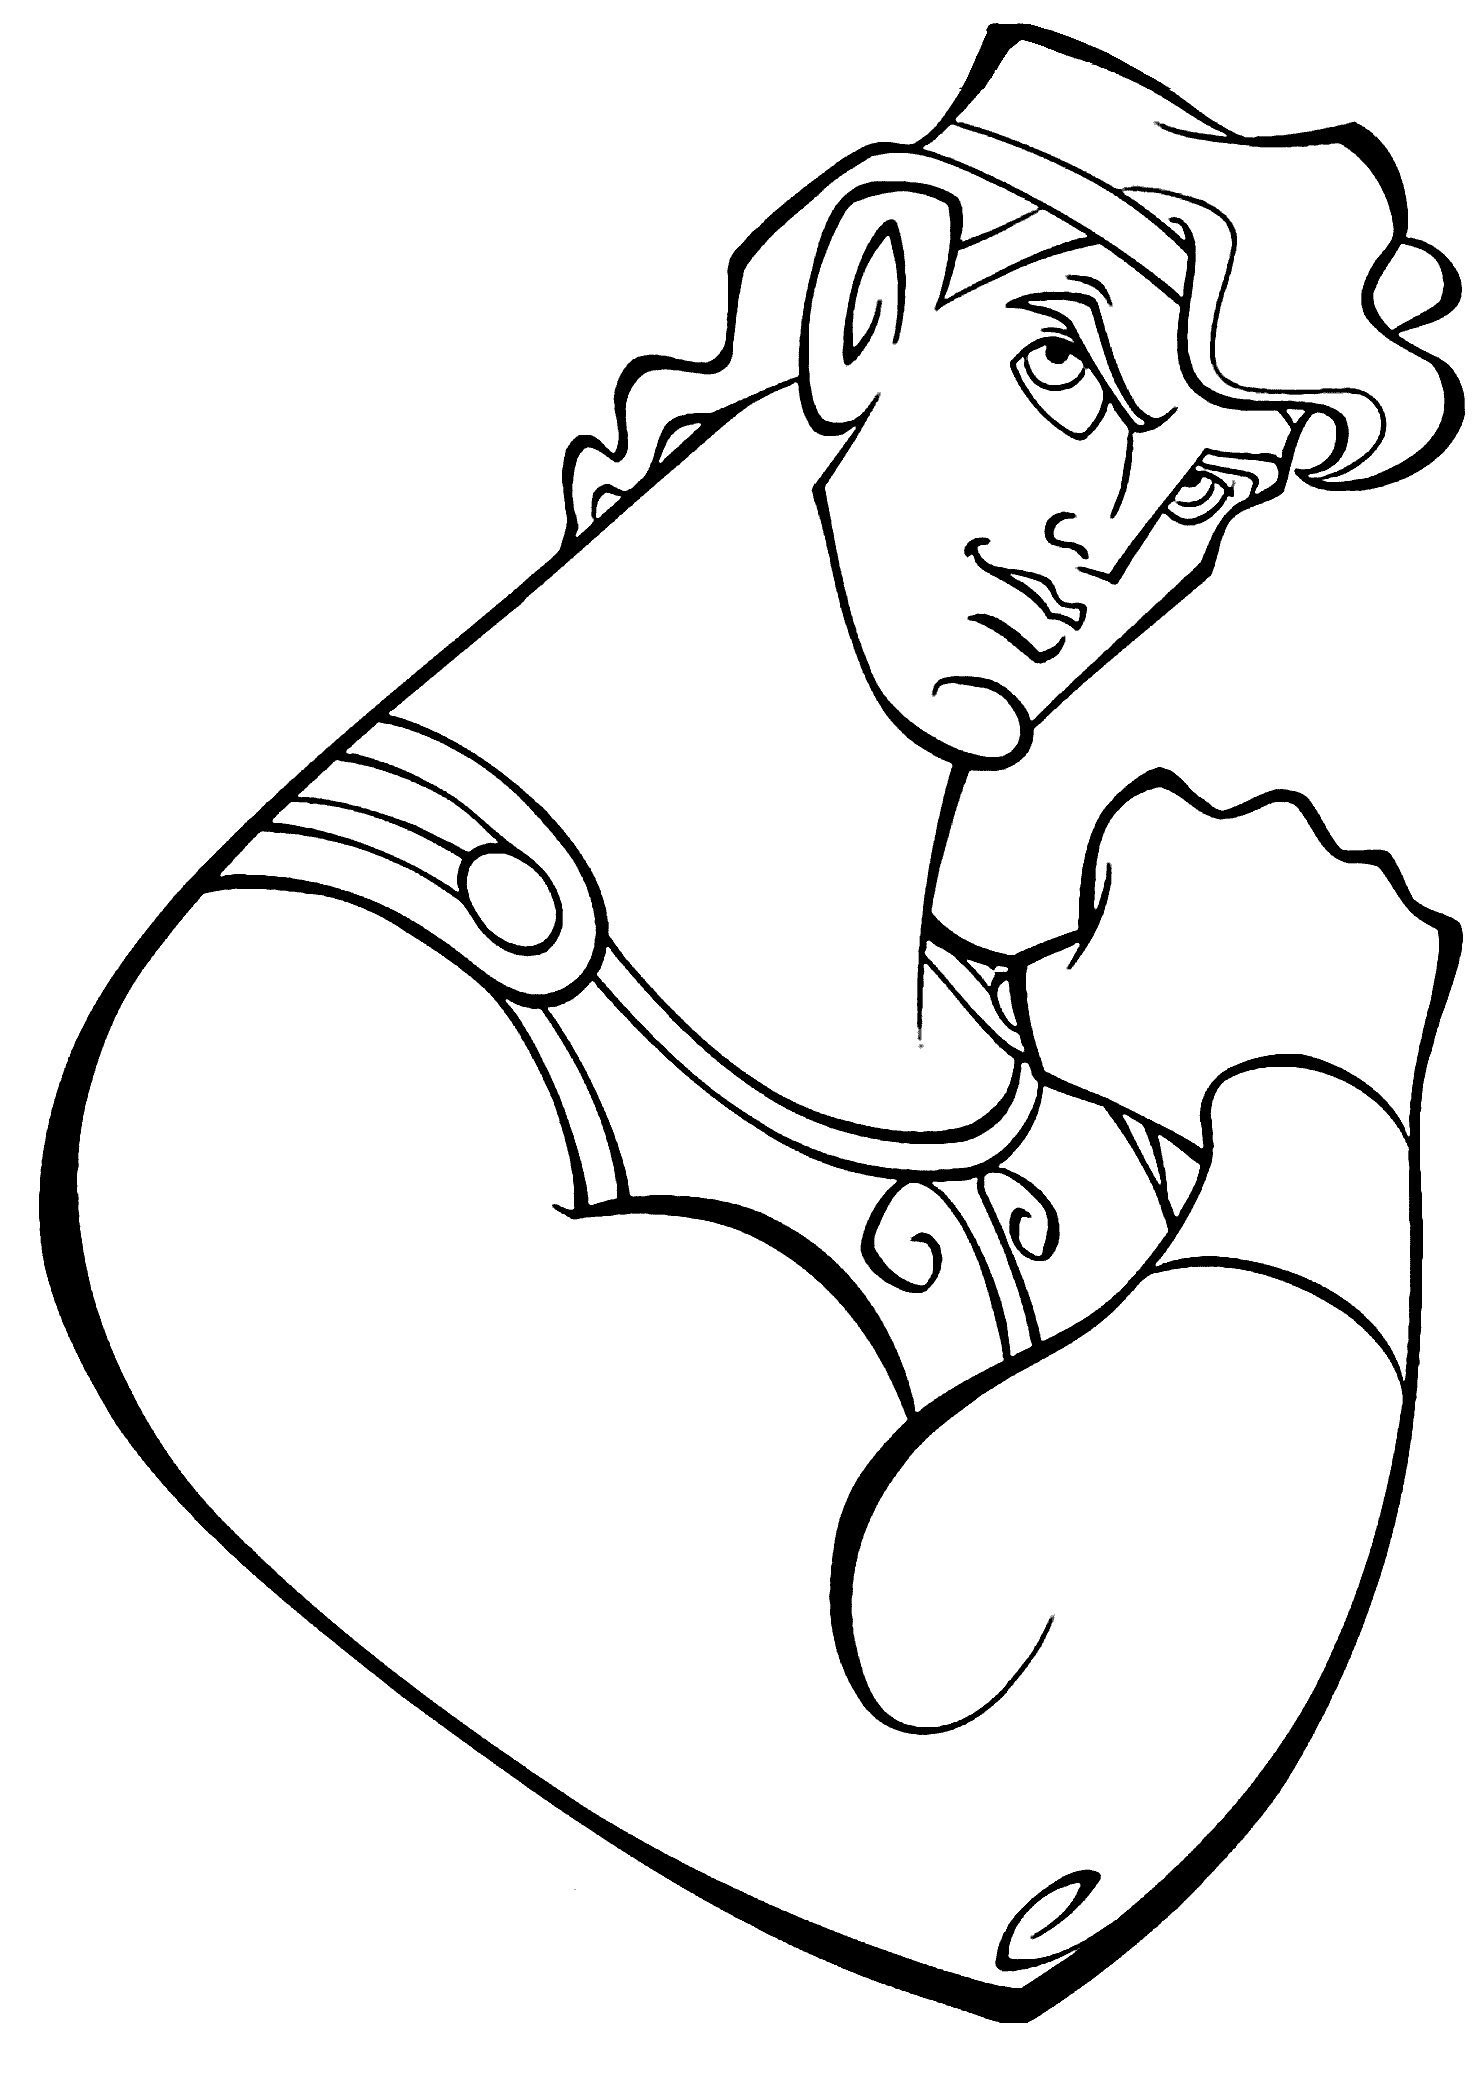 Hercules coloring page